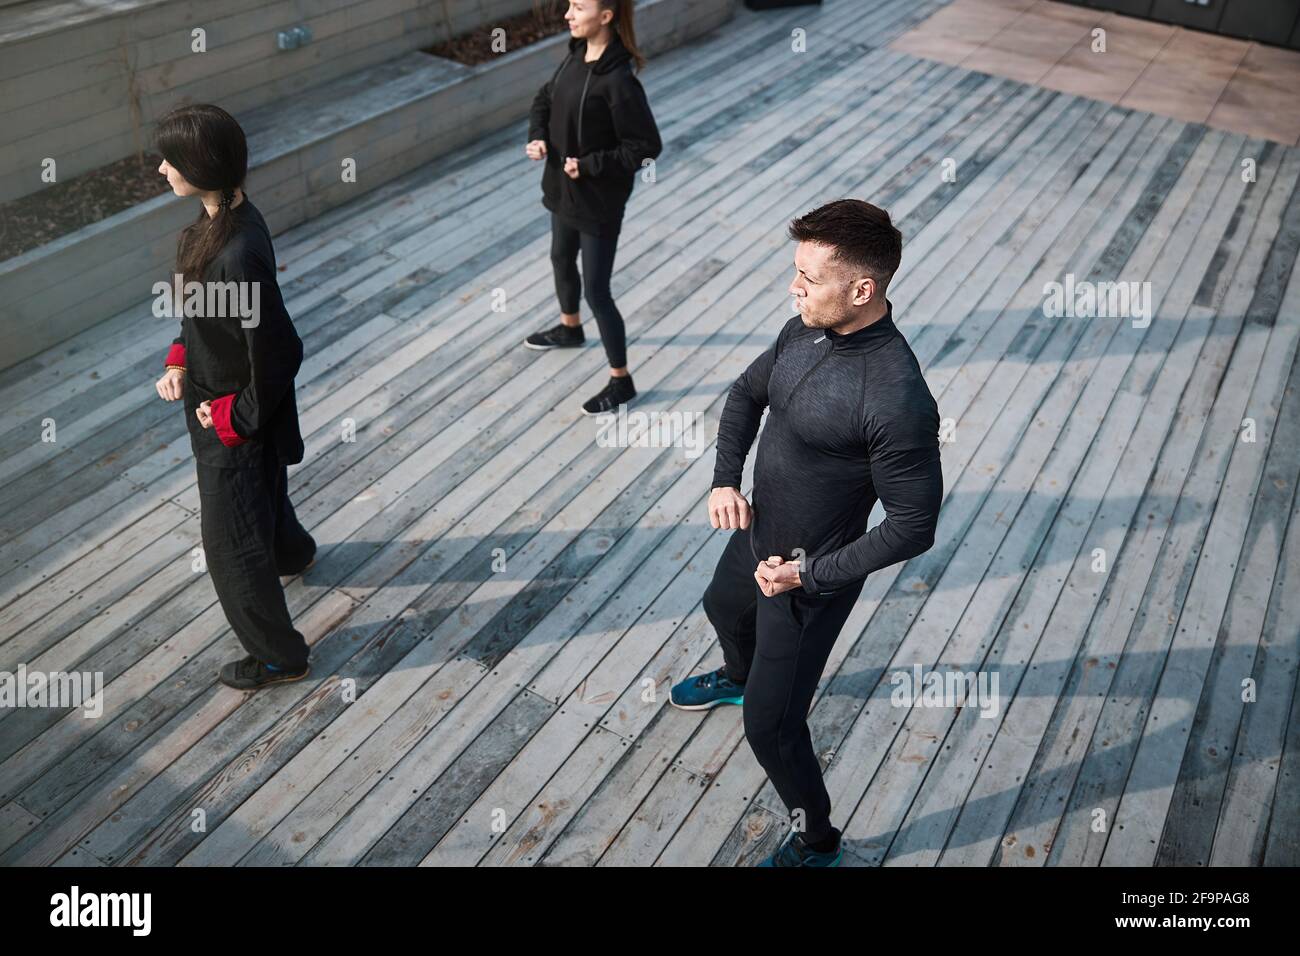 Male with tense muscles standing next to tai chi group Stock Photo